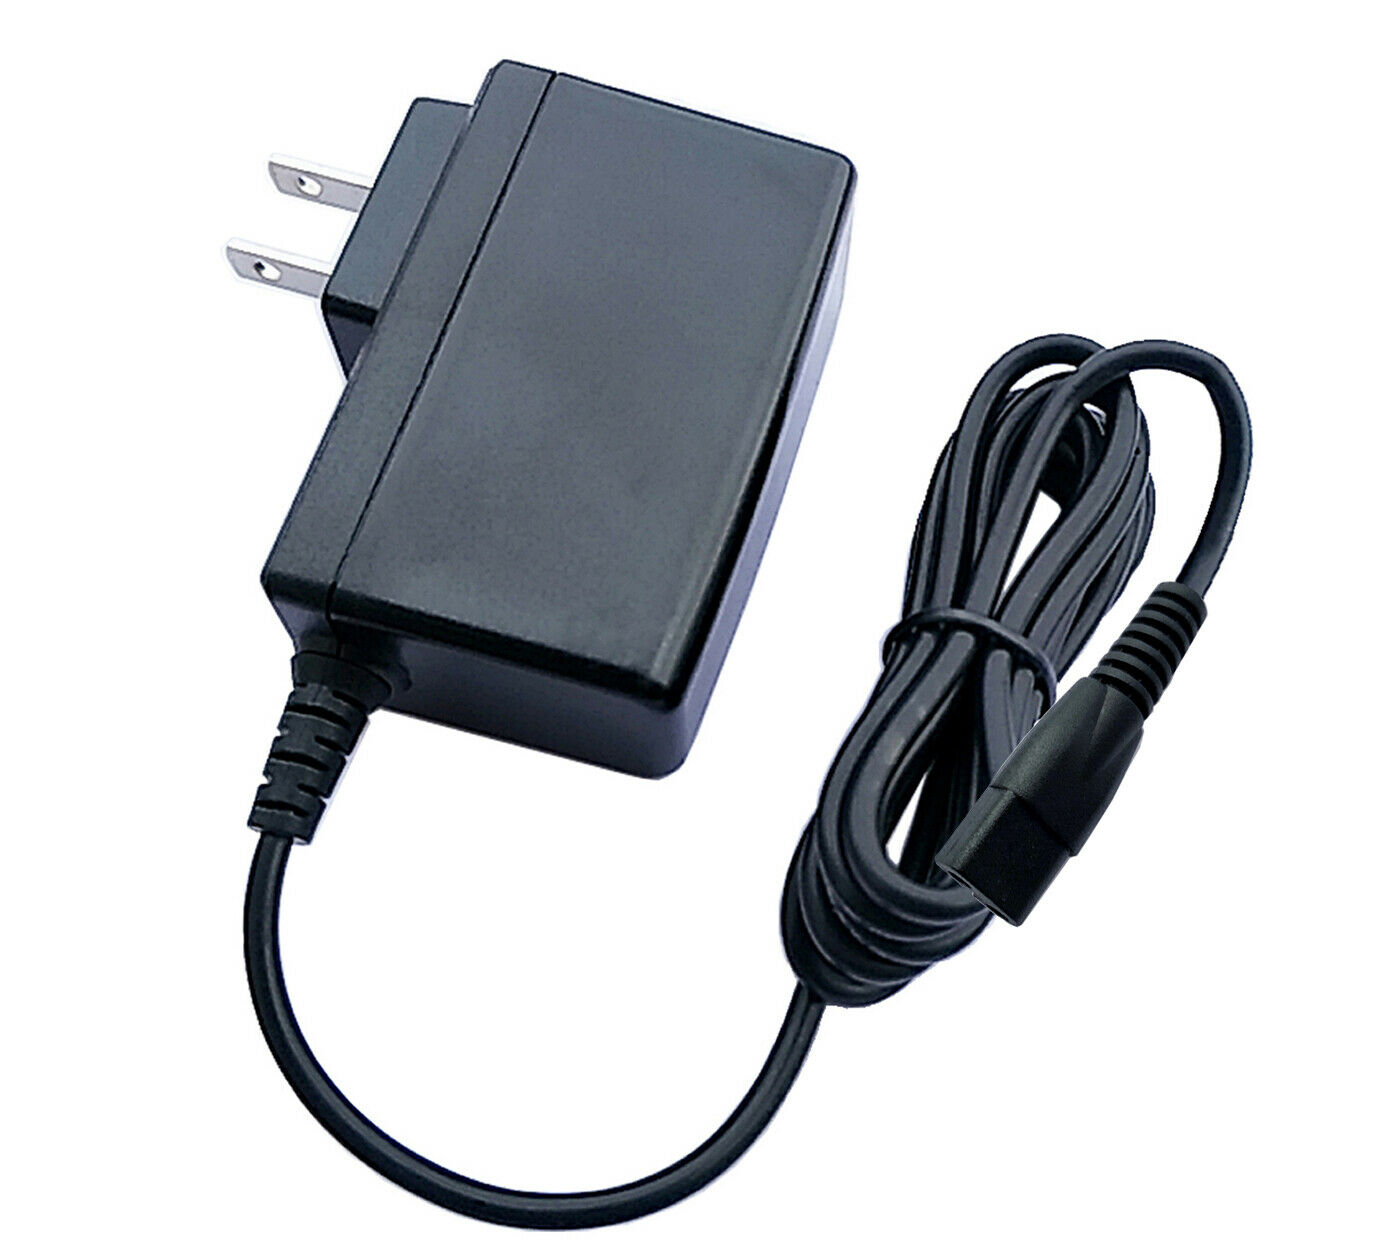 DC Power Adapter for Fairway WRG2-F-050A 5V 3000mA 3A 5.5mm Plug Center + Type: AC/DC Adapter Cable Length: 2 Meters